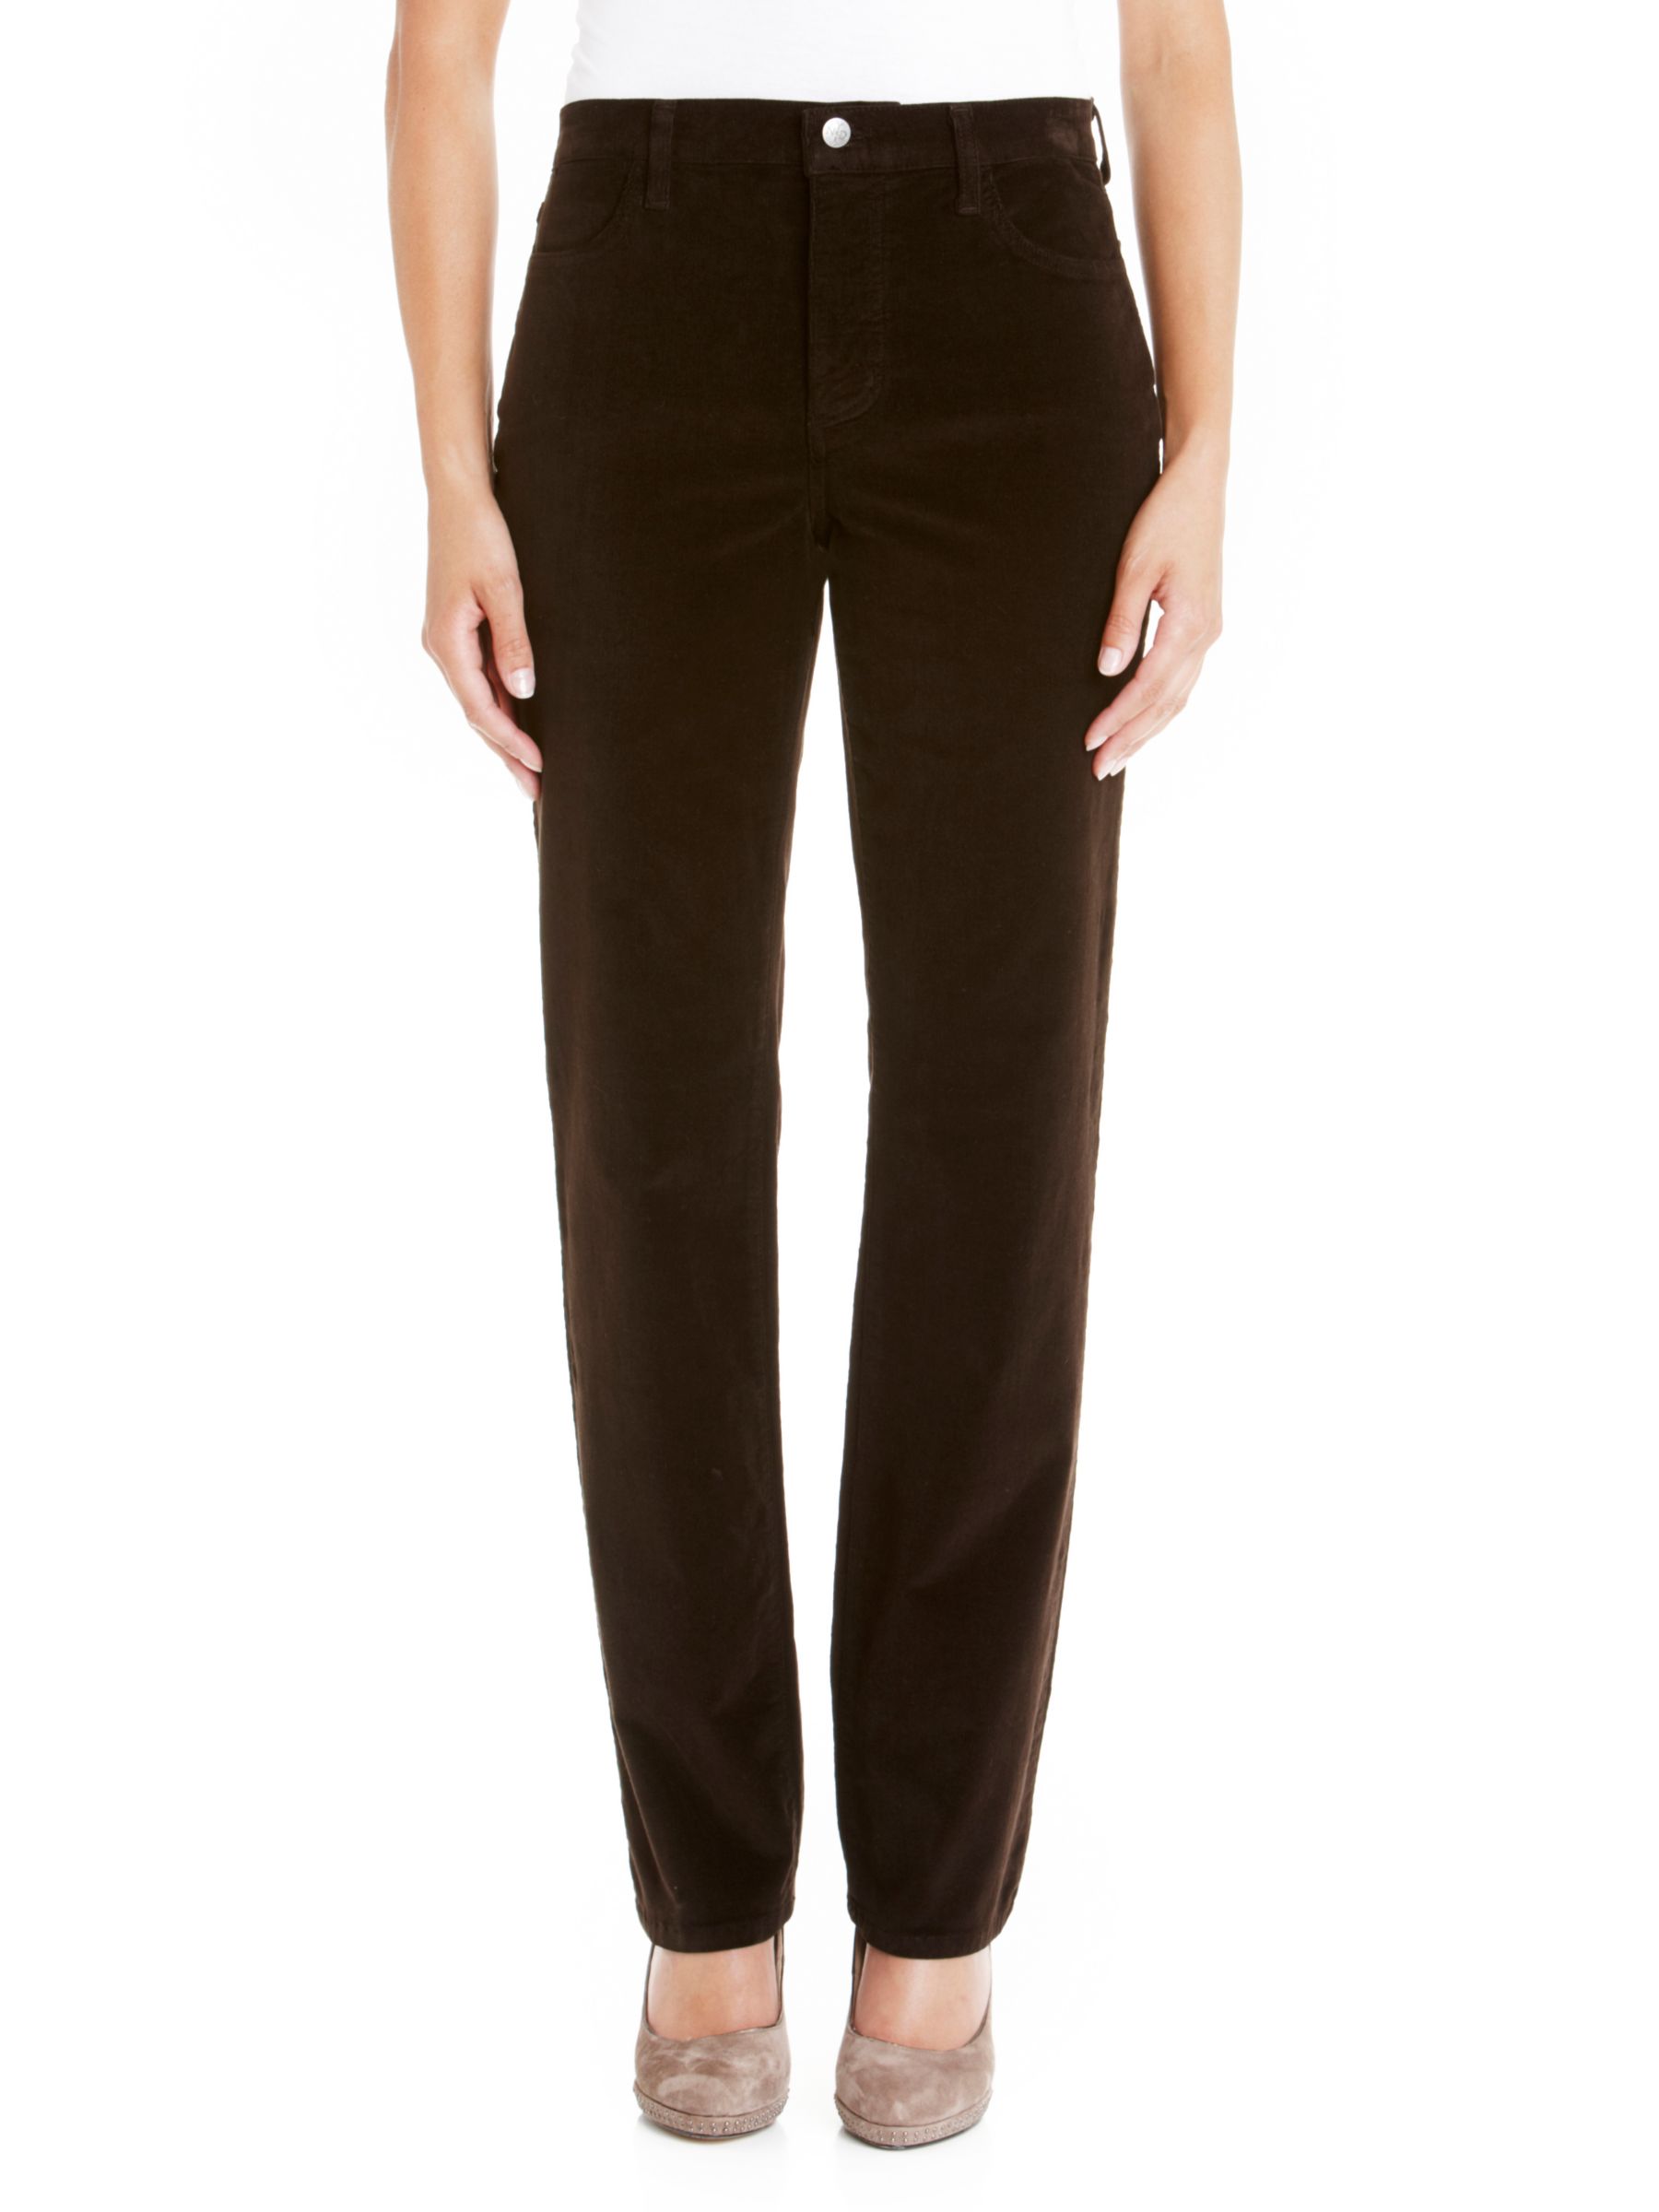 Not Your Daughter's Jeans Cord Trousers, Brown at John Lewis